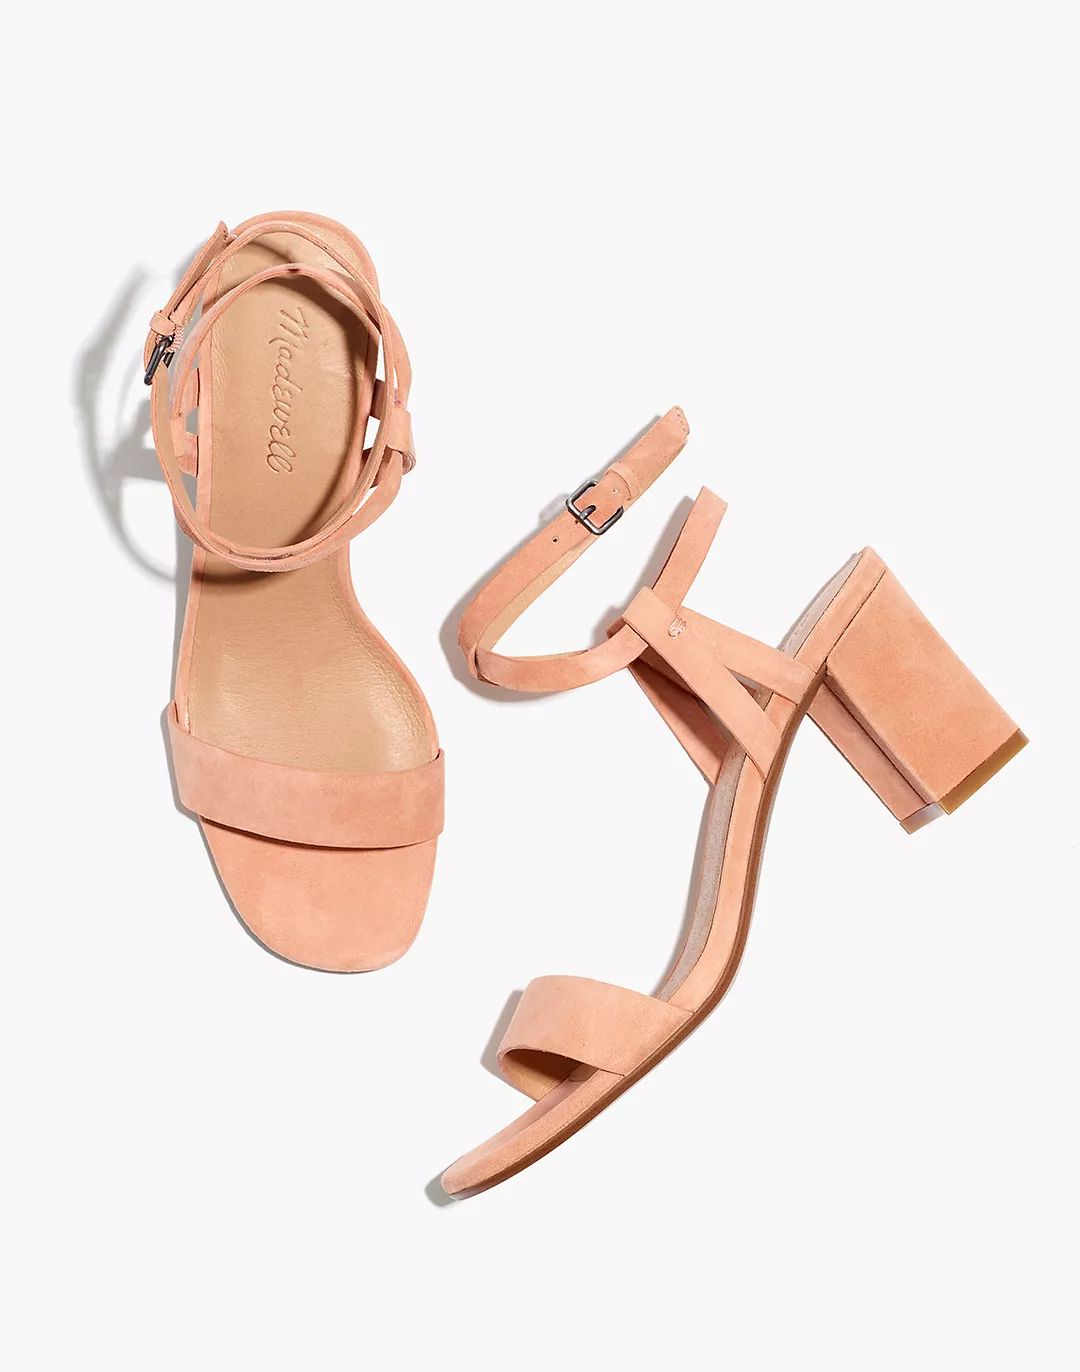 The Loli Ankle-strap Sandal in Suede | Madewell